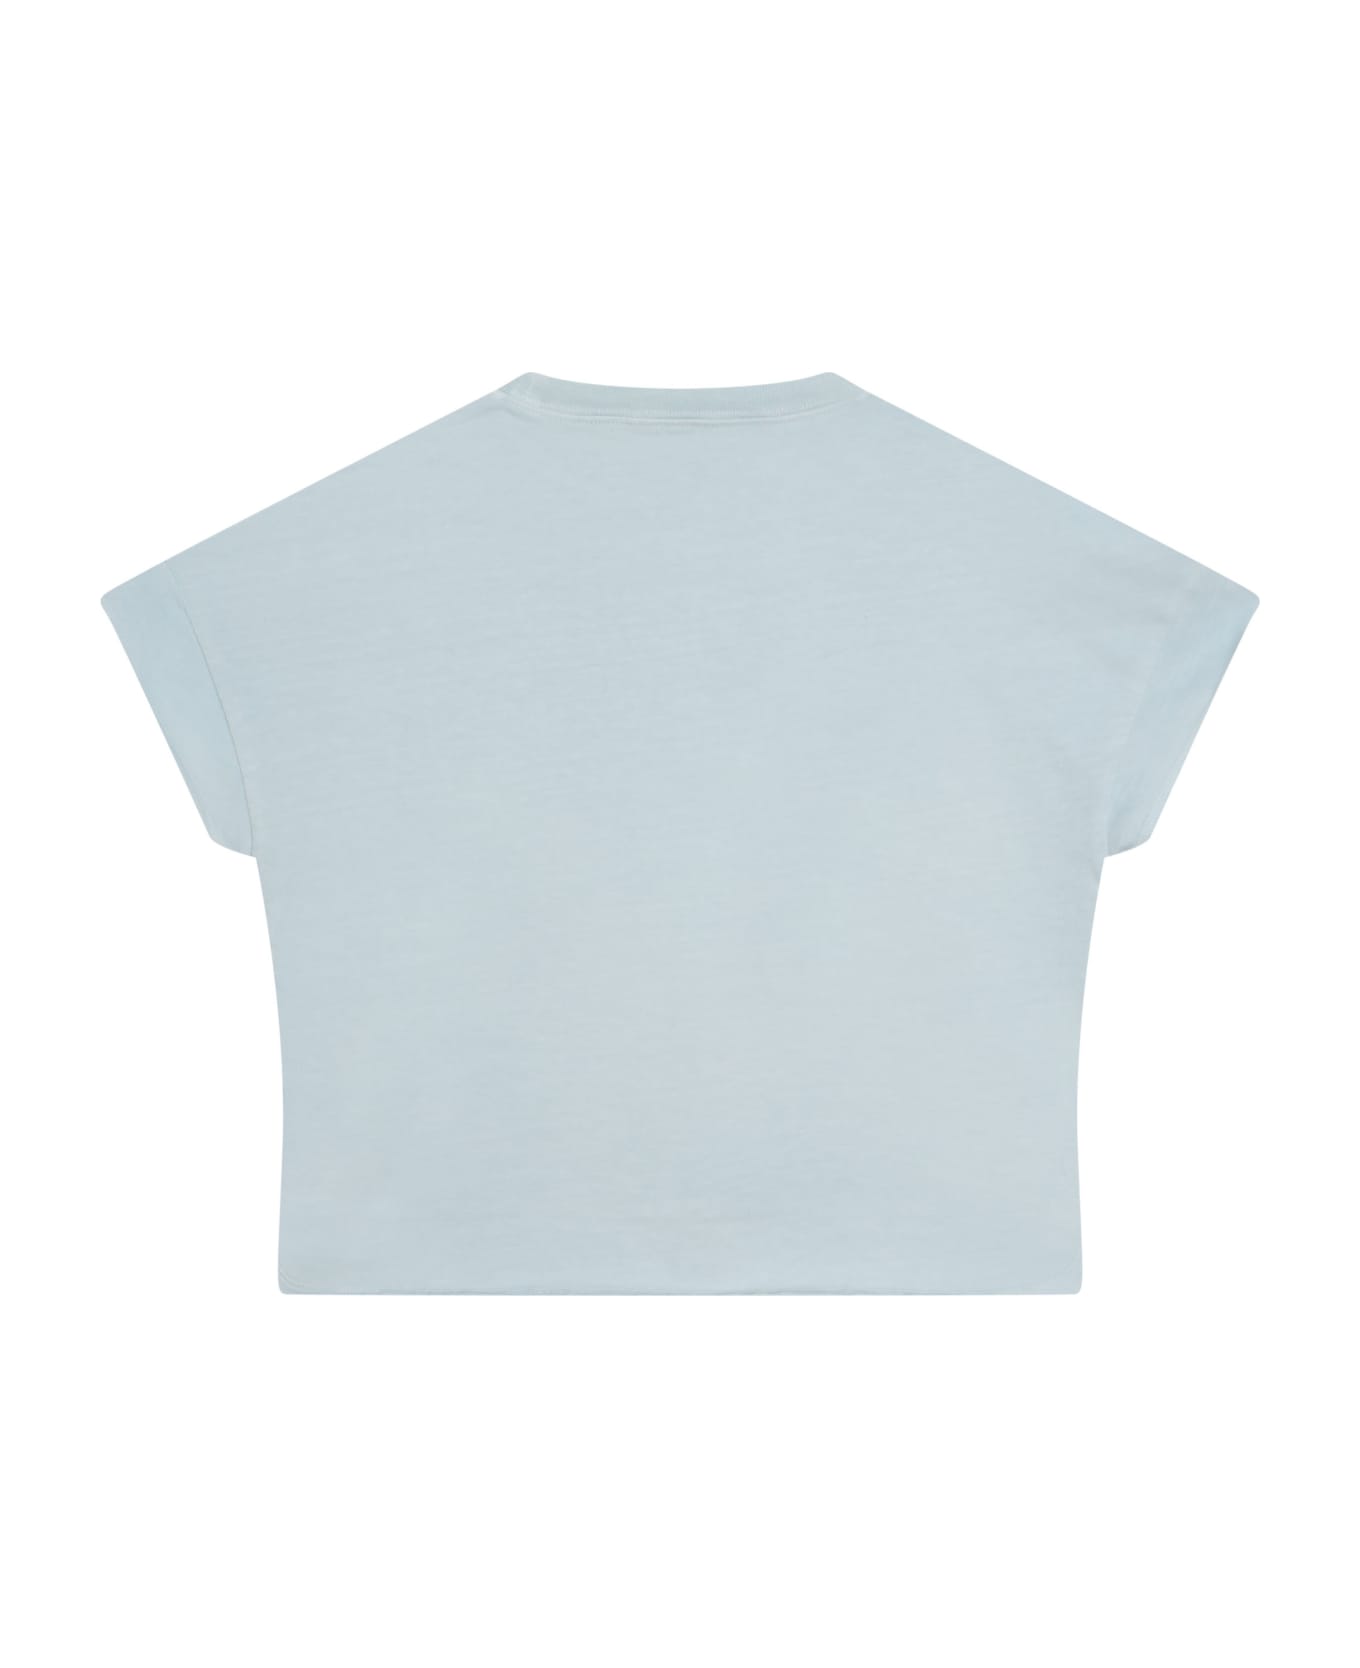 Zadig & Voltaire Printed T-shirt - Light blue